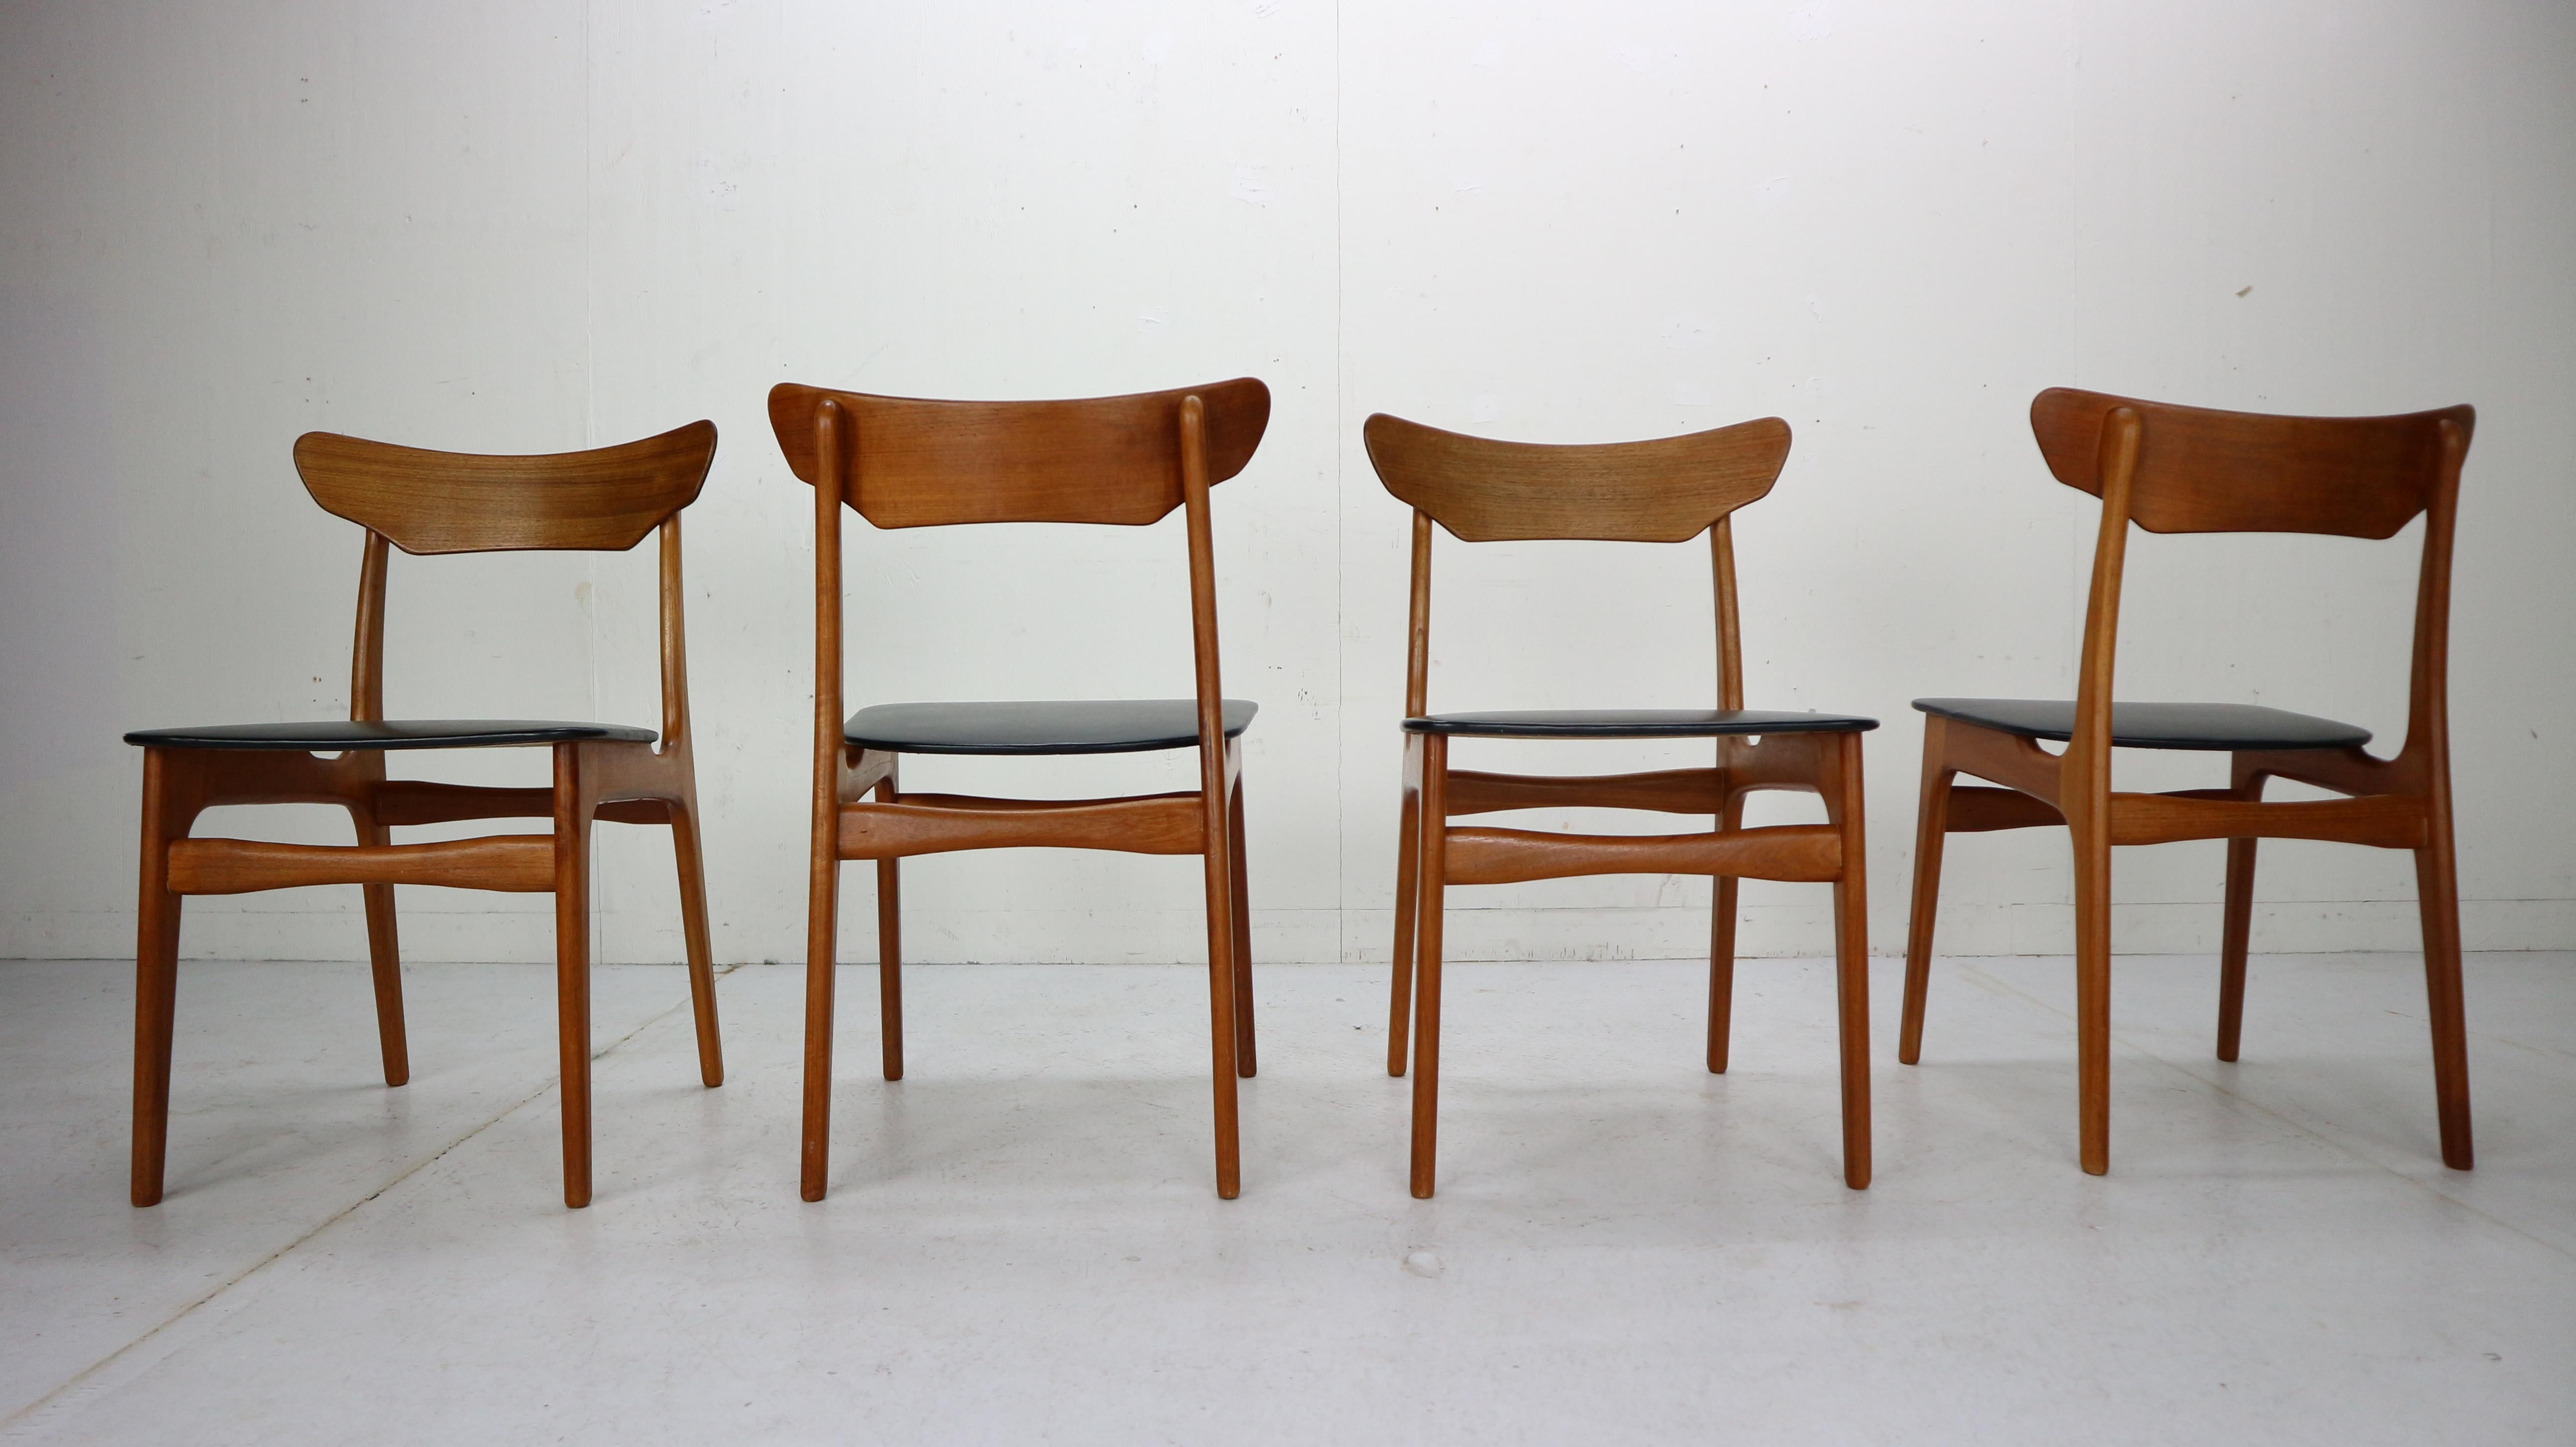 Set of 4 dining room chairs designed by Schiønning & Elgaard for Randers Møbelfabrik manufacturer in 1960s period, Denmark.
Solid teak wood frames with black original faux leather in a good vintage condition.
Chairs has an original mark.